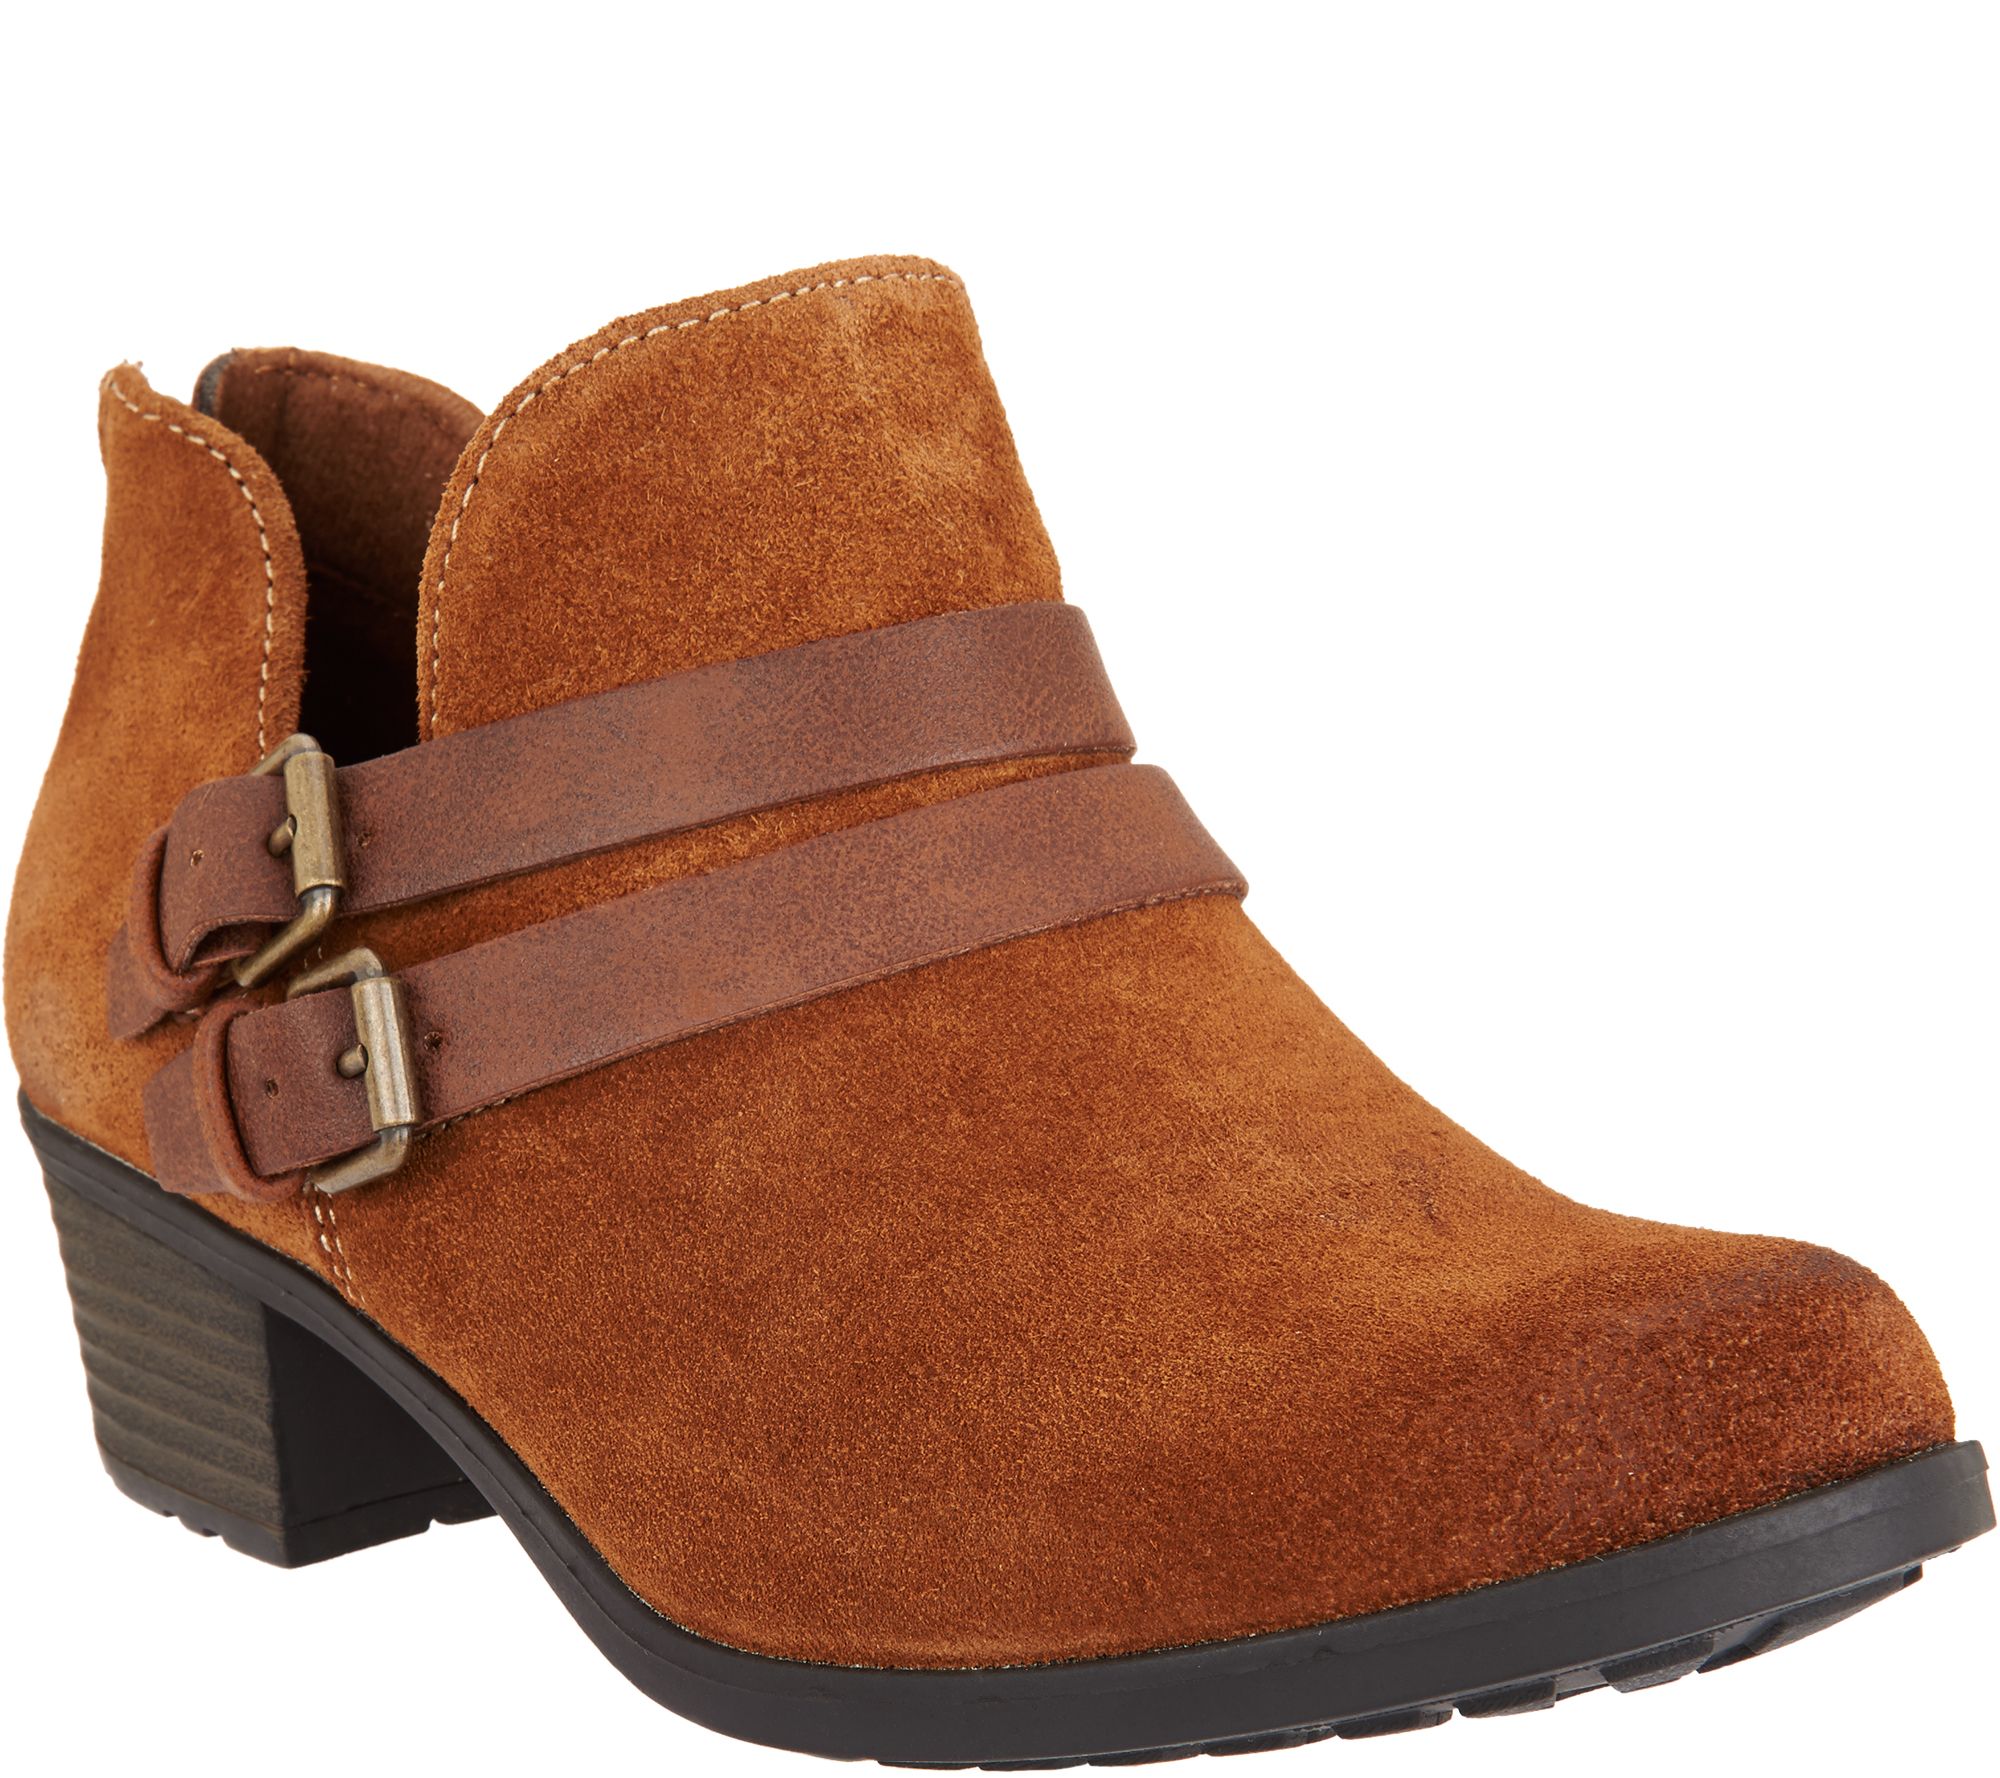 Earth Origins Suede Ankle Boots w/ Buckle Details - Destiny - Page 1 ...